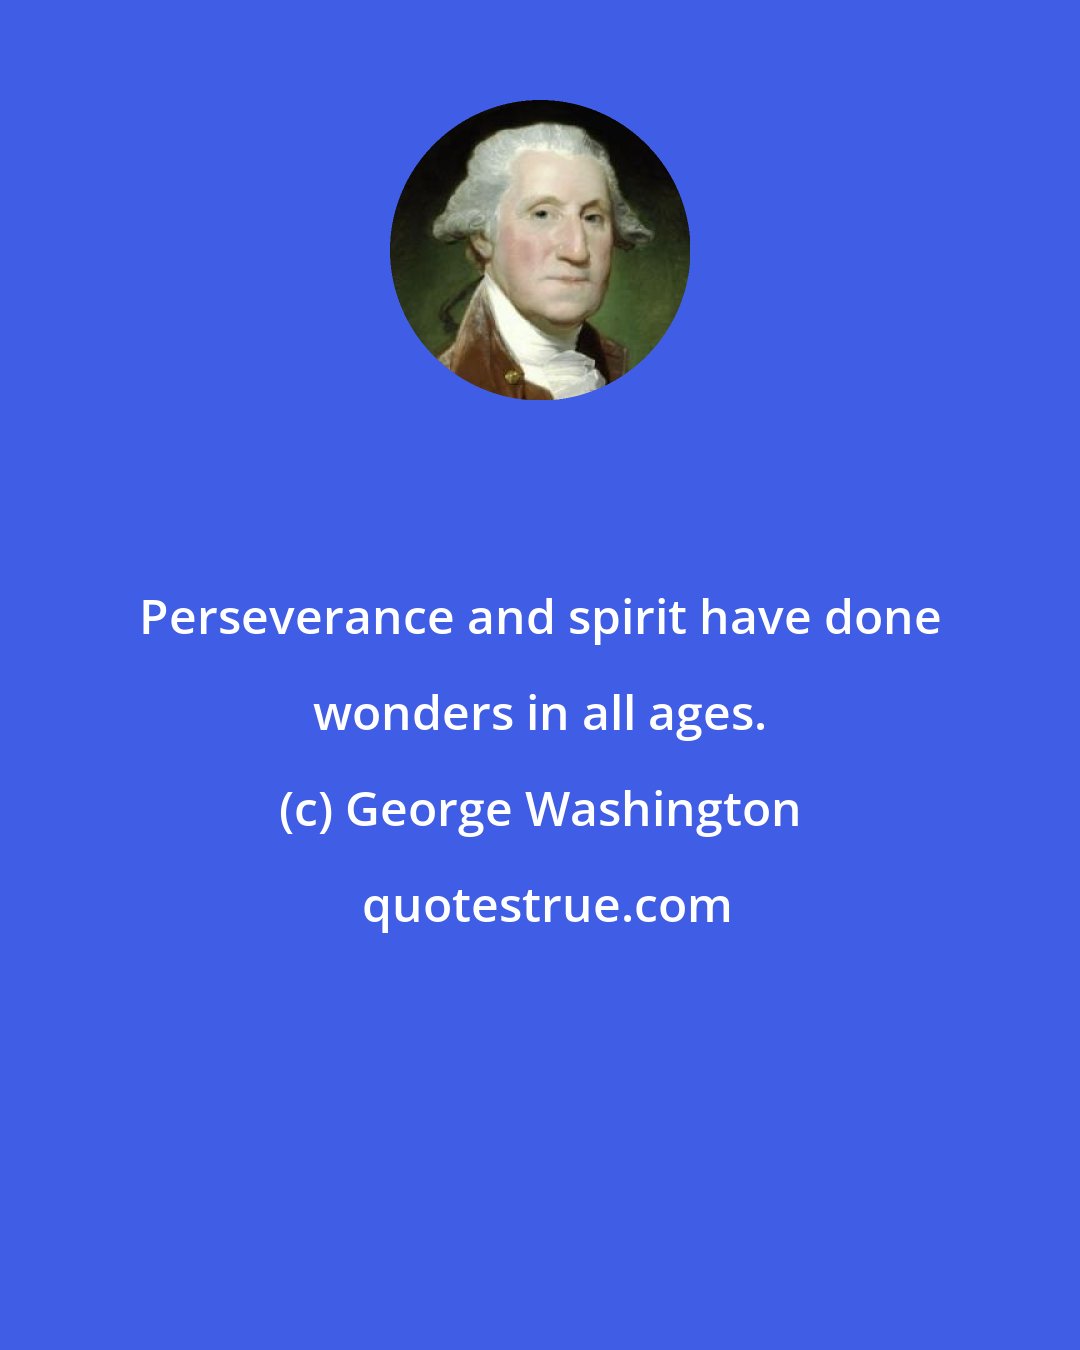 George Washington: Perseverance and spirit have done wonders in all ages.